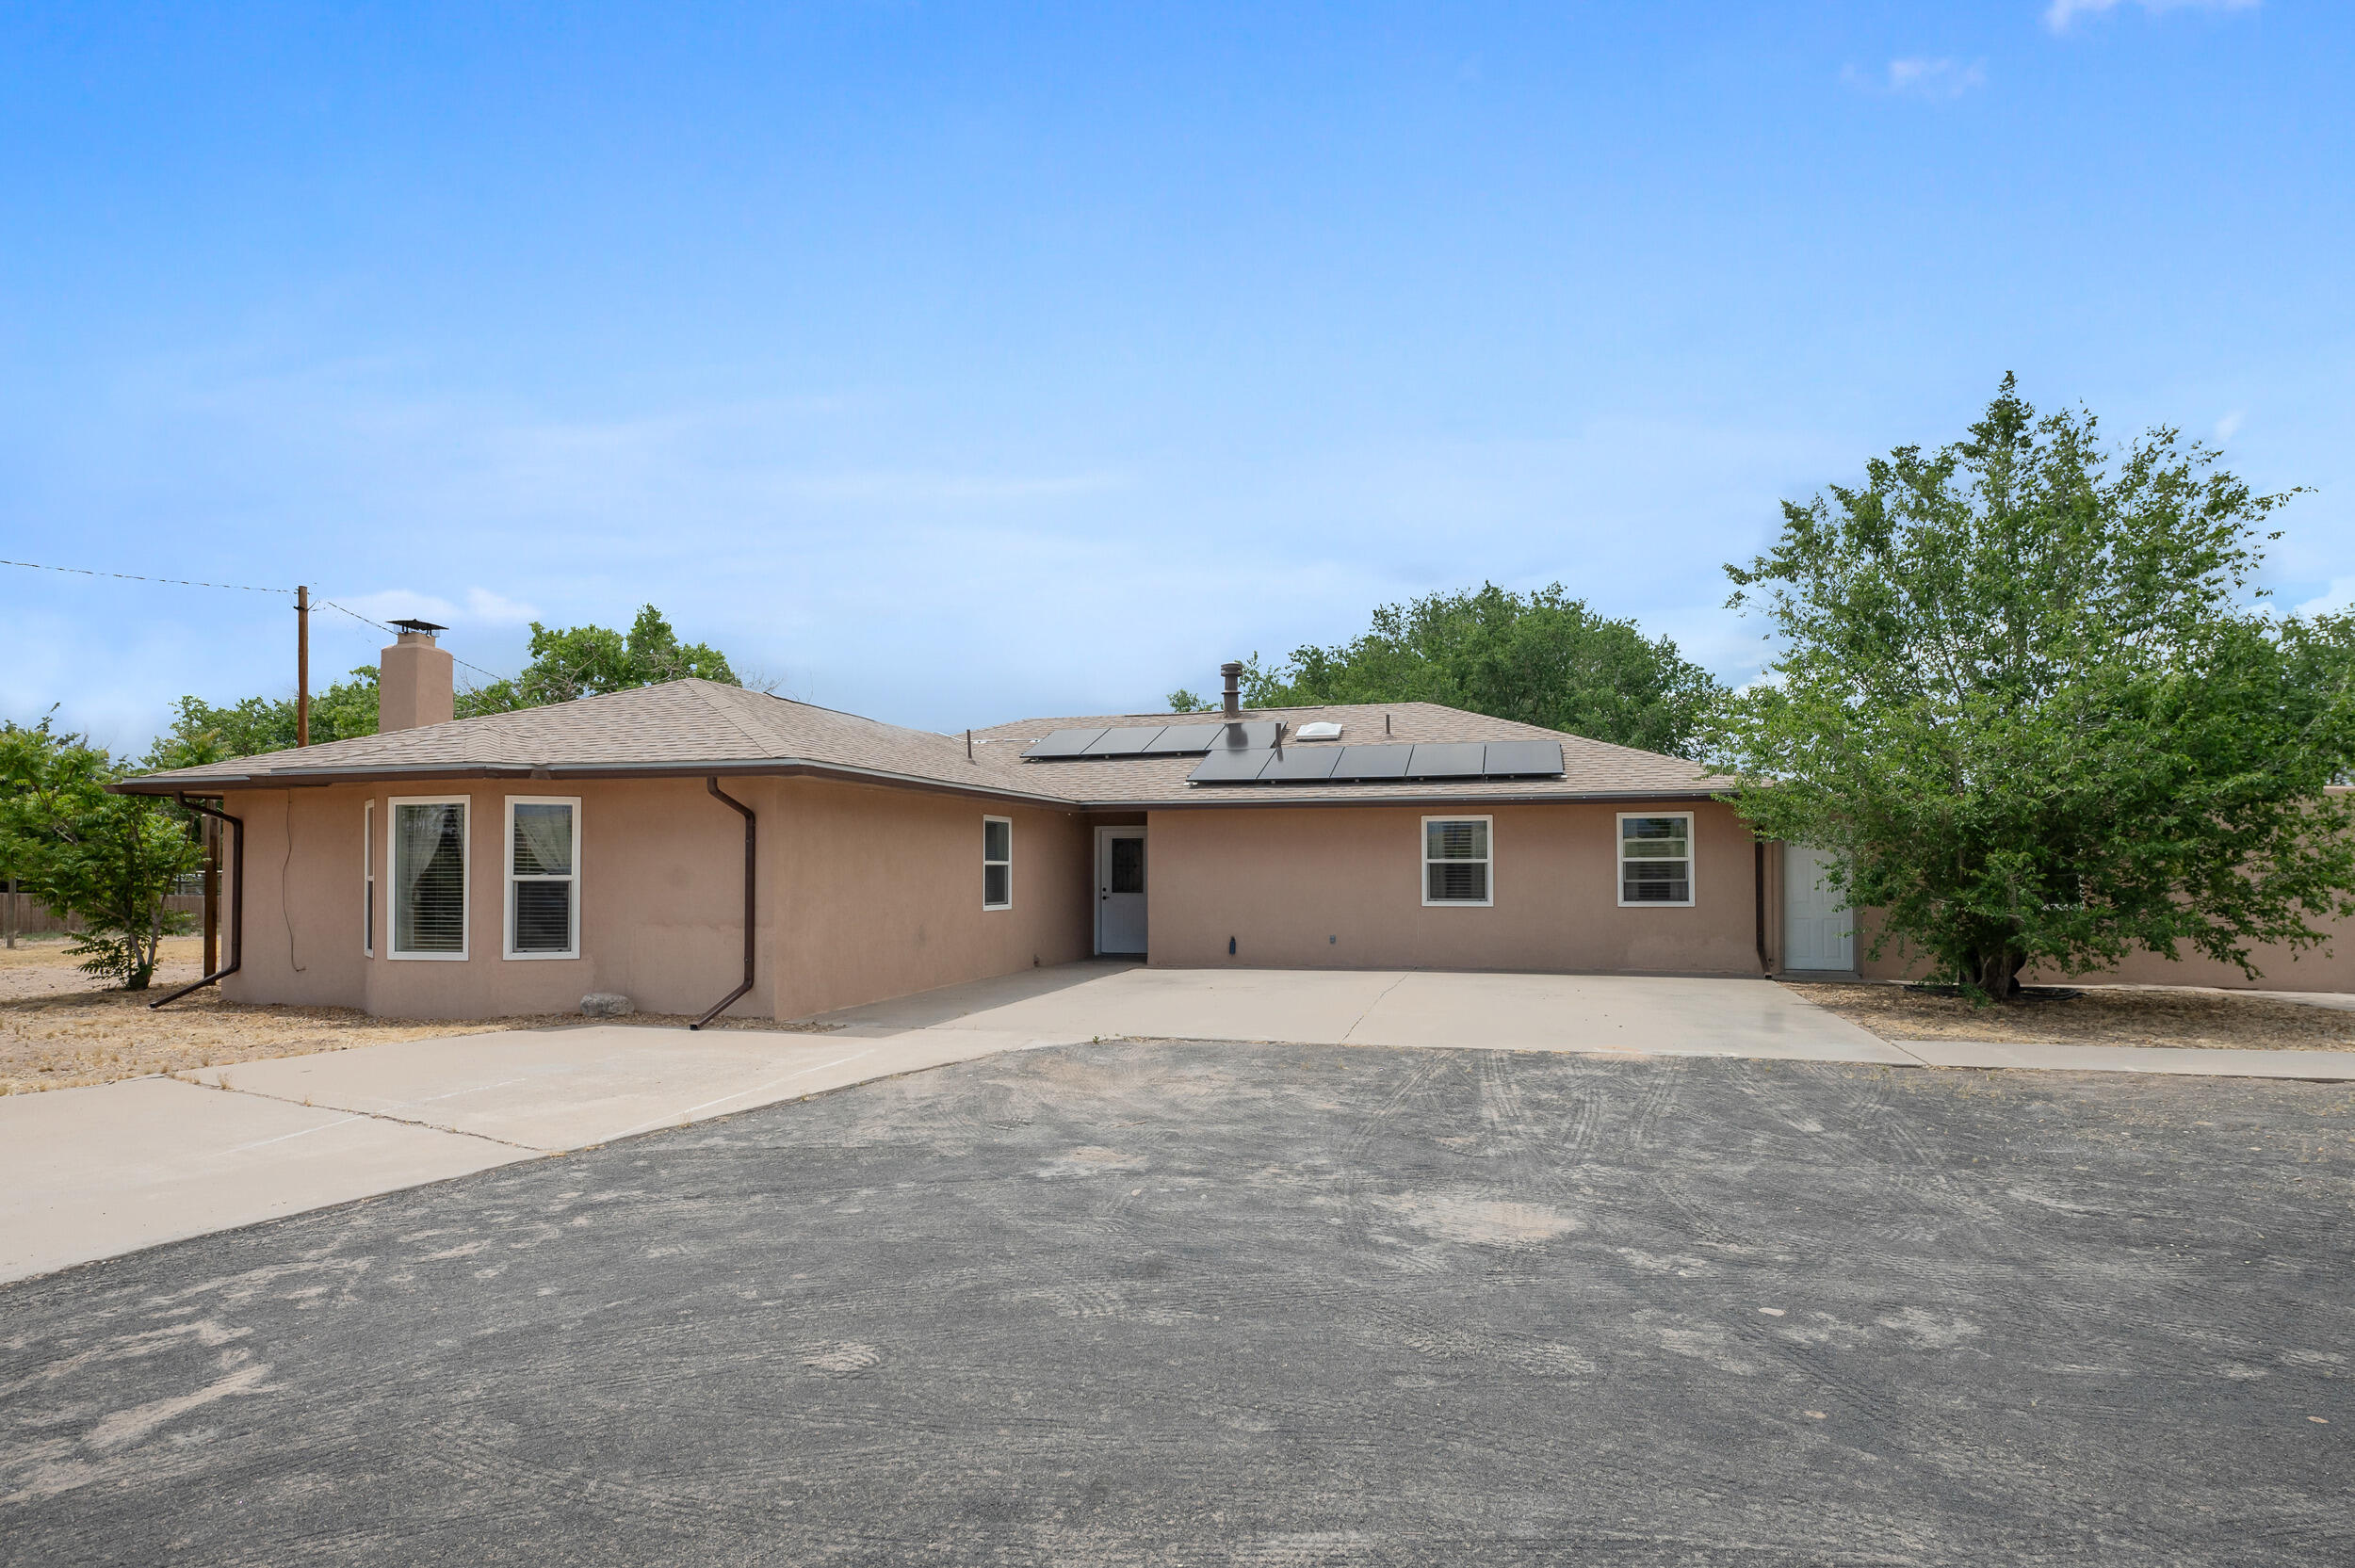 Spectacular home located just south of the UNM Valencia campus and away from the hustle and bustle of the city.  You'll enjoy seeing the pride of ownership radiating through out this home.  The home showcases a large kitchen with updated cabinets and a kitchen bar that overlooks the living room.  Additionally, the large family room offers extra living space with a wood burning fireplace.  Both areas provide excellent space to entertain family and friends.  Enjoy your morning coffee in the sun room or outdoor deck with a covered canopy.  Furthermore, you'll enjoy the refrigerated air for those hot summer days.  Lastly, the lot is big enough to give you the extra space you need but not too big to maintain.  So don't delay, schedule your showing today!